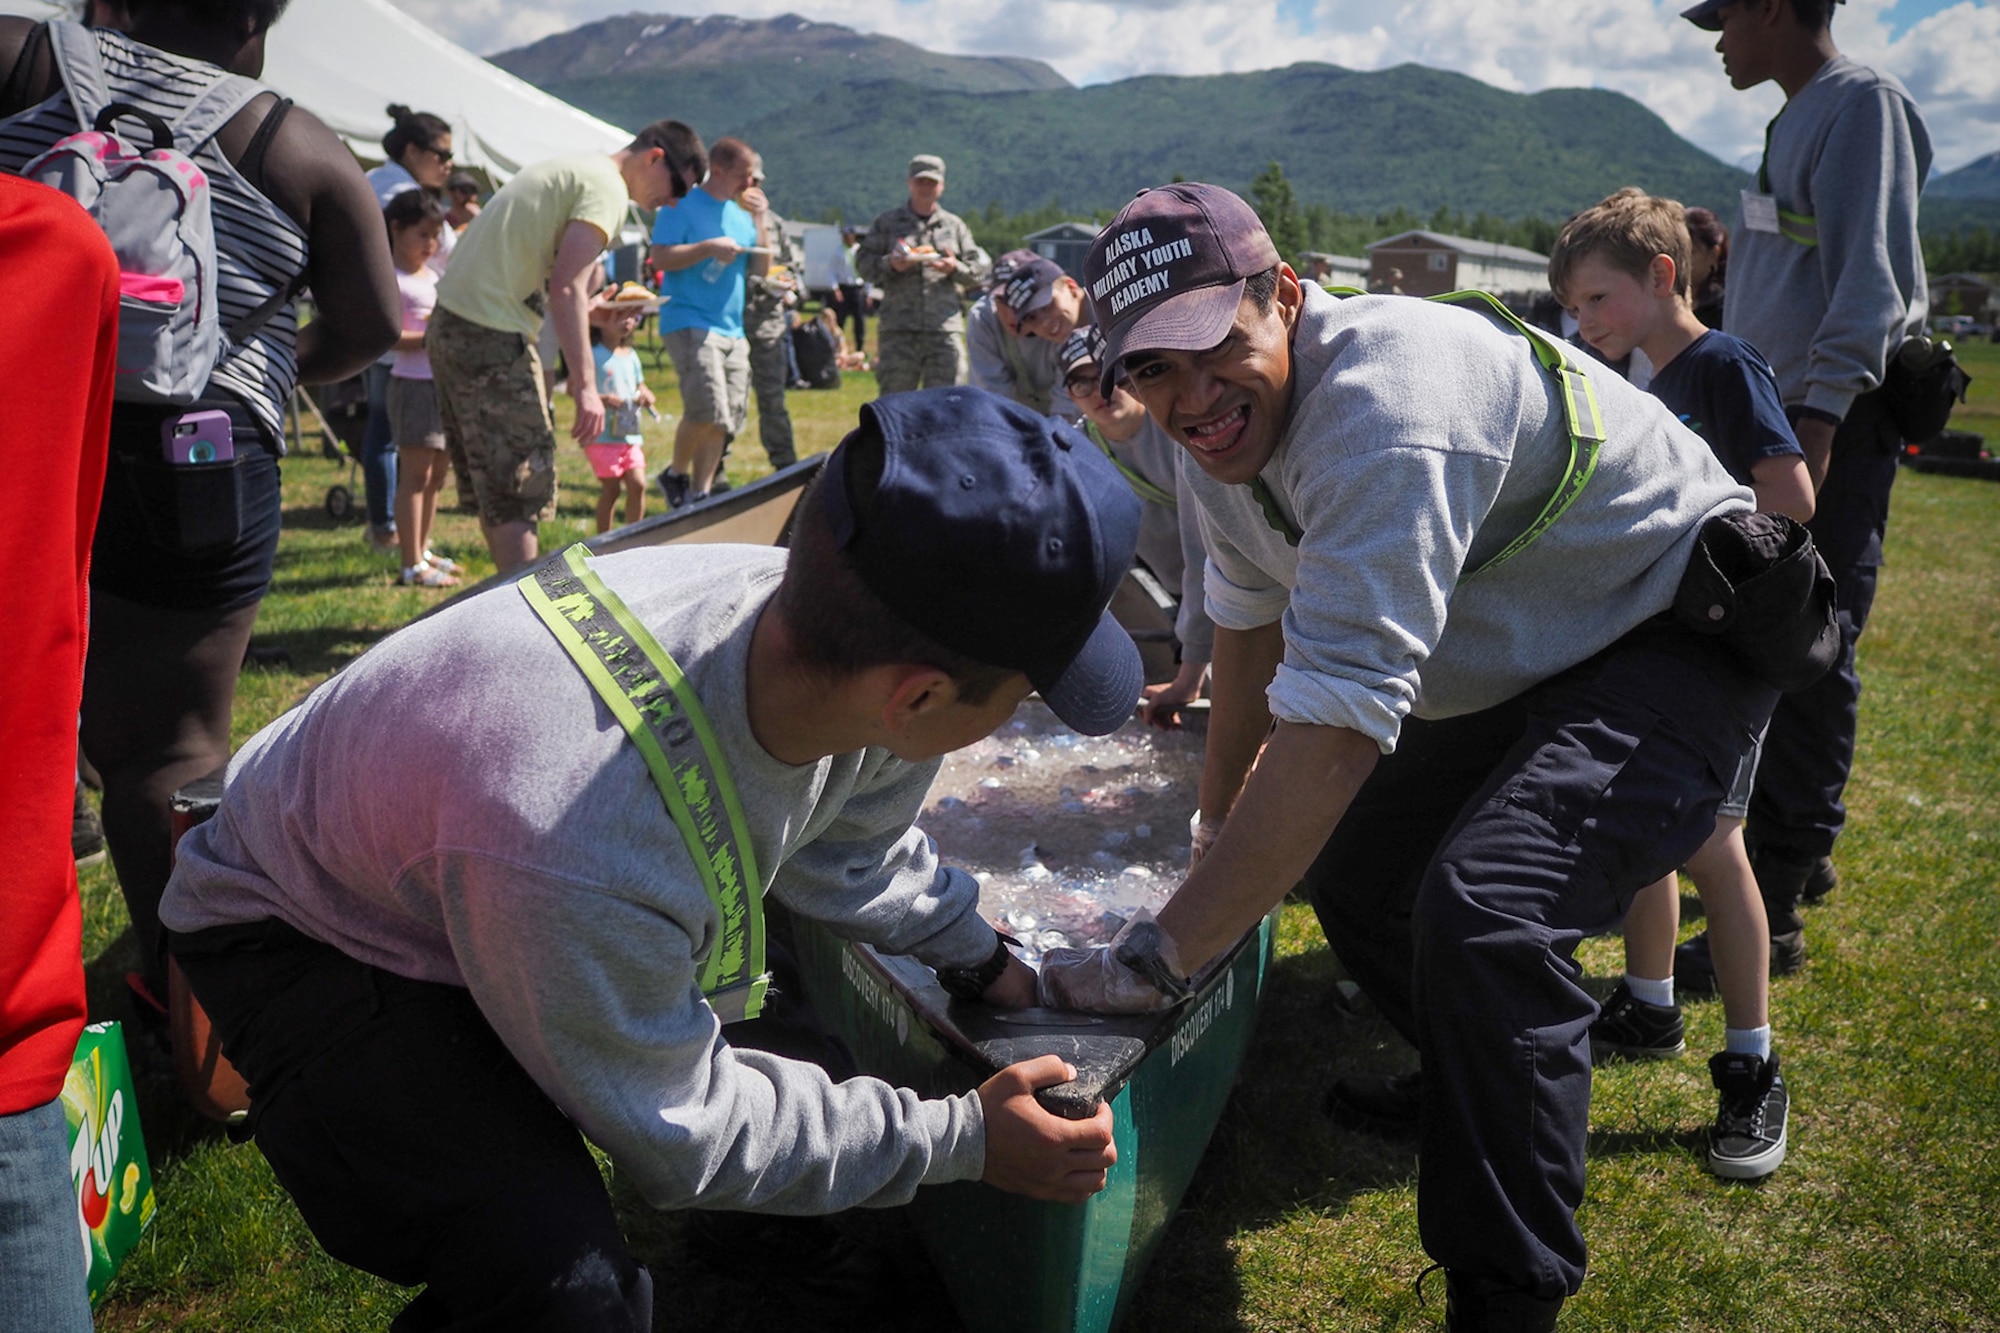 Alaska Military Youth Academy members Brennan Rico, left, and Toa Toluono help move a canoe loaded with ice and soft drinks as Service members, dependents, and Department of Defense civilians attend the Military Appreciation Week picnic at the Joint Base Elmendorf-Richardson, Alaska, Buckner Fitness Center fields June 16, 2017. Several organizations came together to provide a variety of family-fun activities such as competitive sporting events for the adults, face painting and bouncy houses for the children in addition to the Anchorage Chamber of Commerce-provided food and music during the annual event.